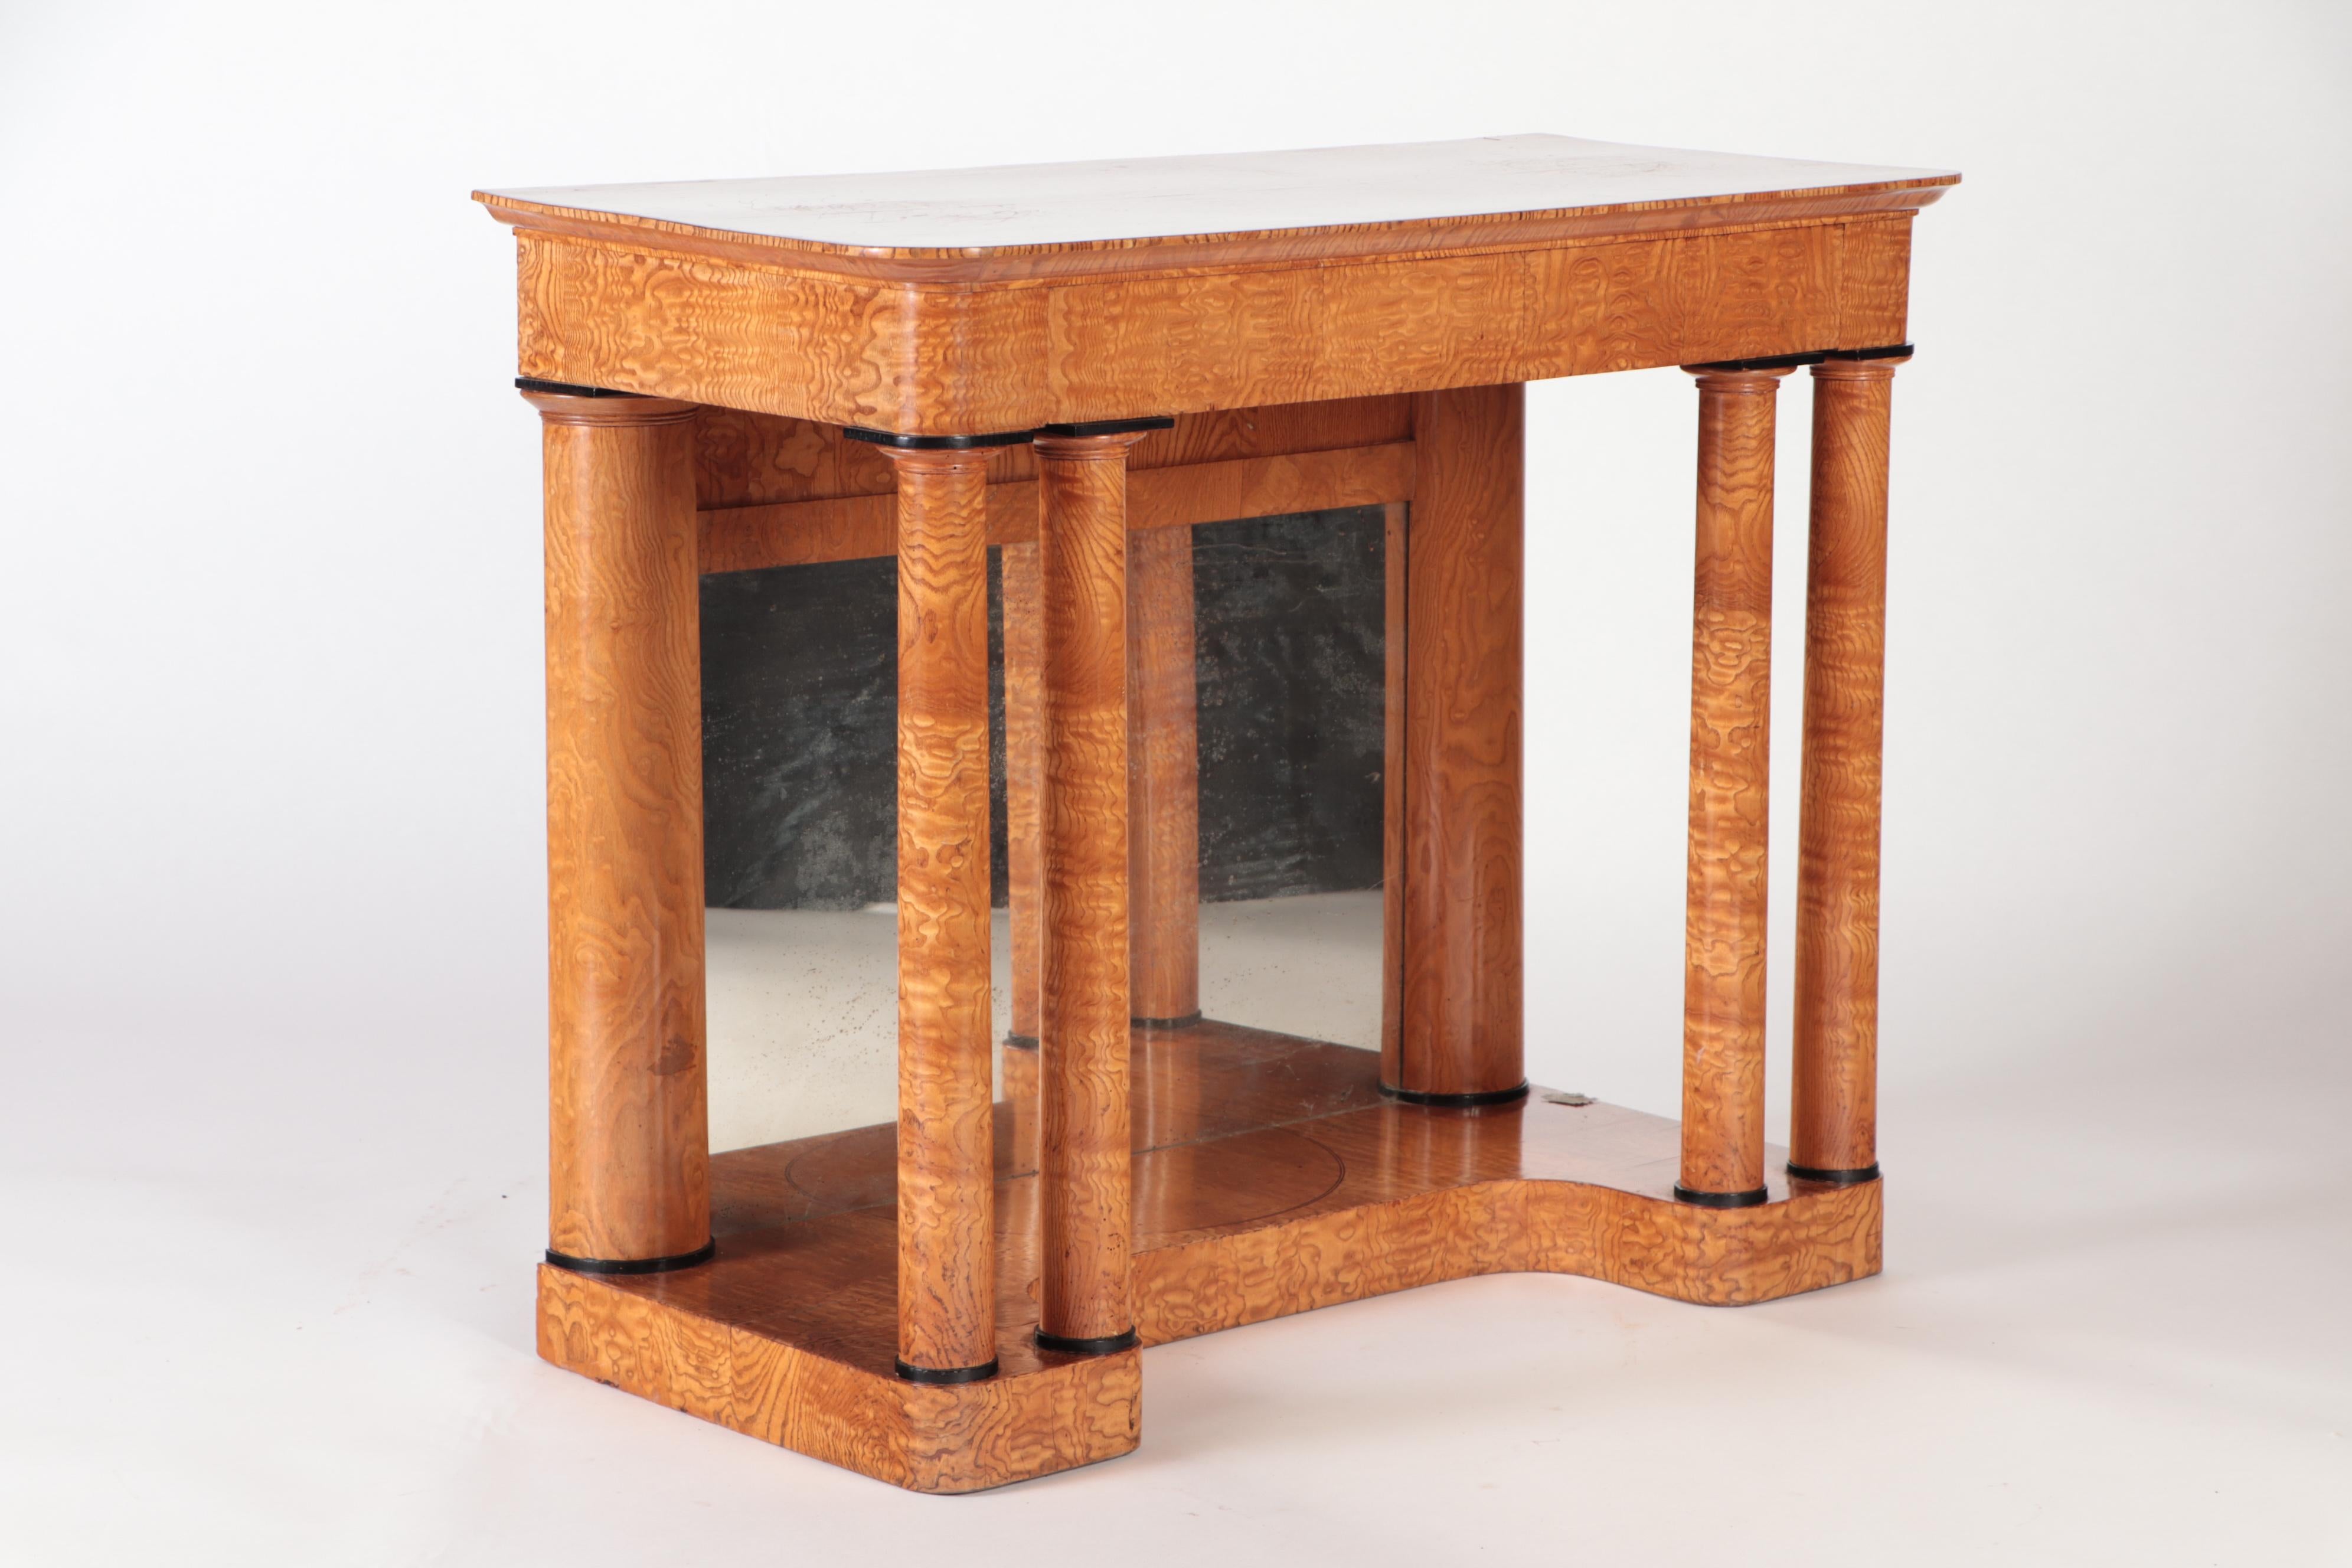 A nineteenth century figured elm console resting on four round Doric style columns. Supporting the legs, the wooden base is concave in its center. There is one central drawer.